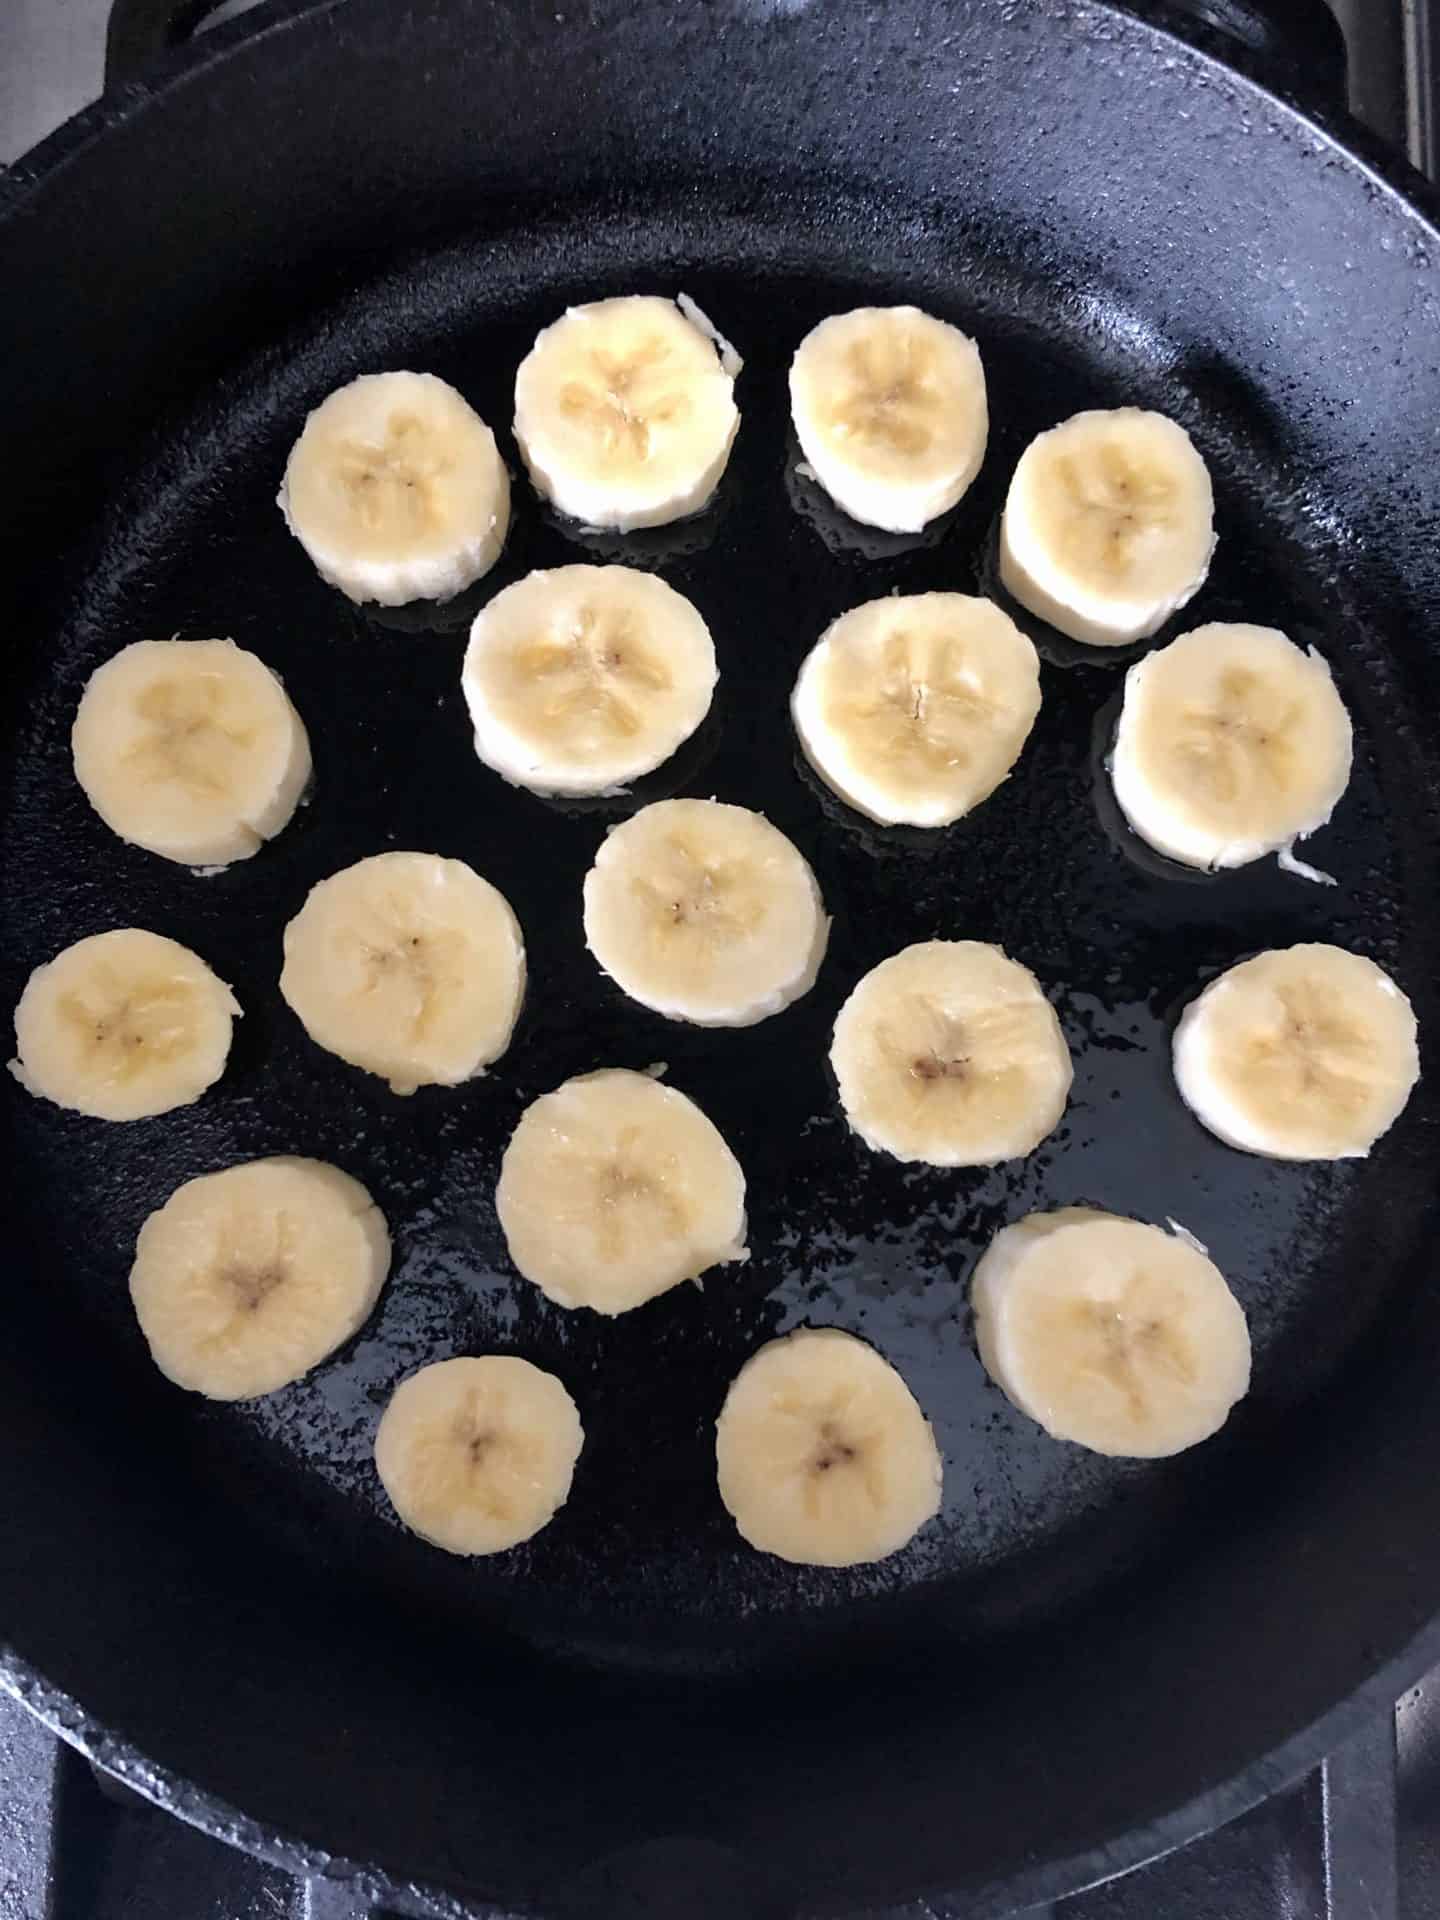 Cast iron pan with bananas being cooked overhead shot